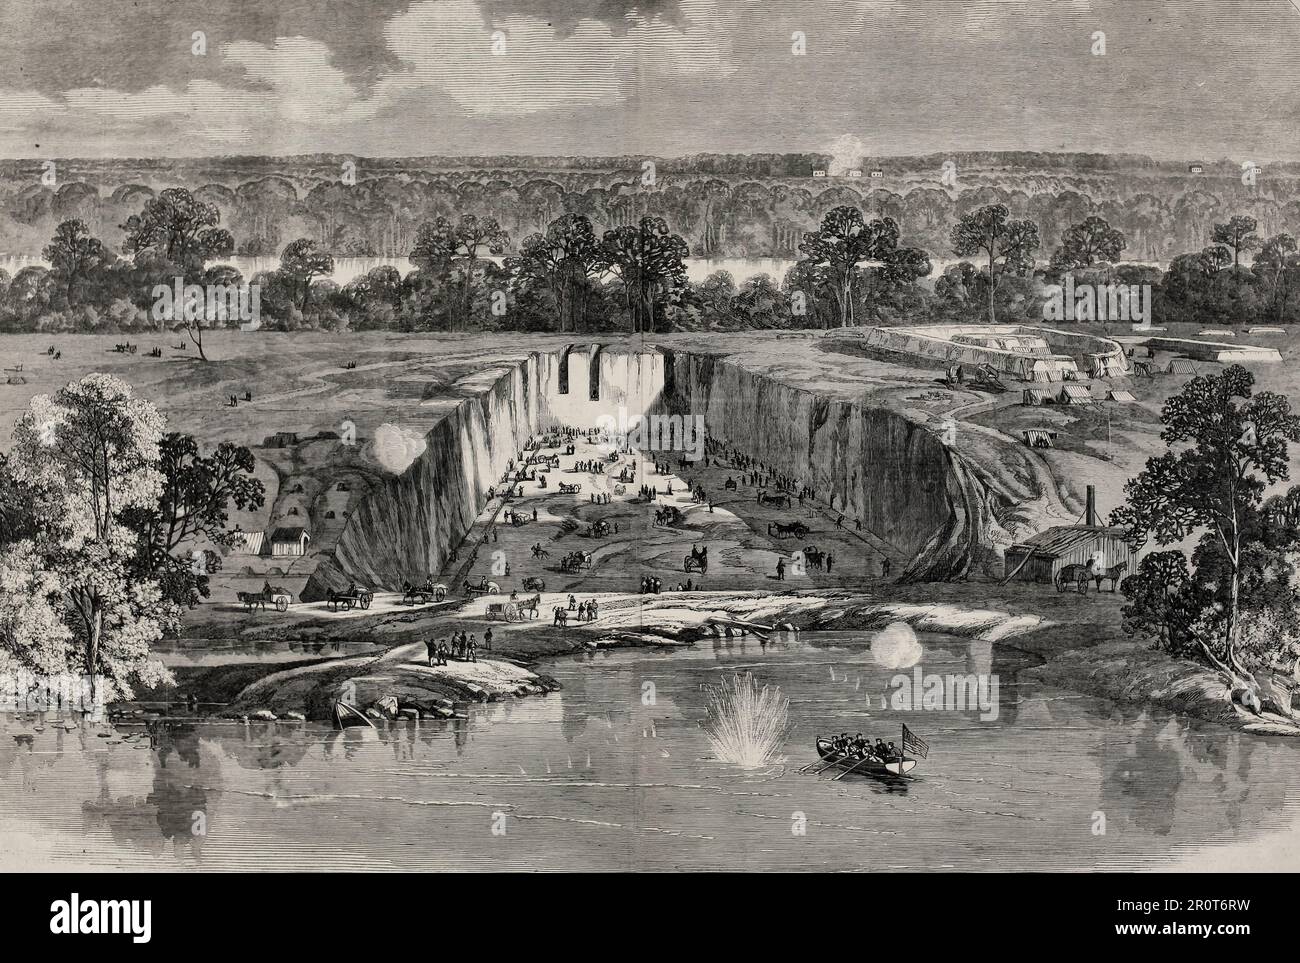 The advance against Richmond - Progress of Work on Dutch Gap Canal, in Major-General Butler's Department - Cutting through Peninsula, to avoid Rebel Obstructions and shorten the route of gunboats to Richmond. American Civil War, 1864 Stock Photo